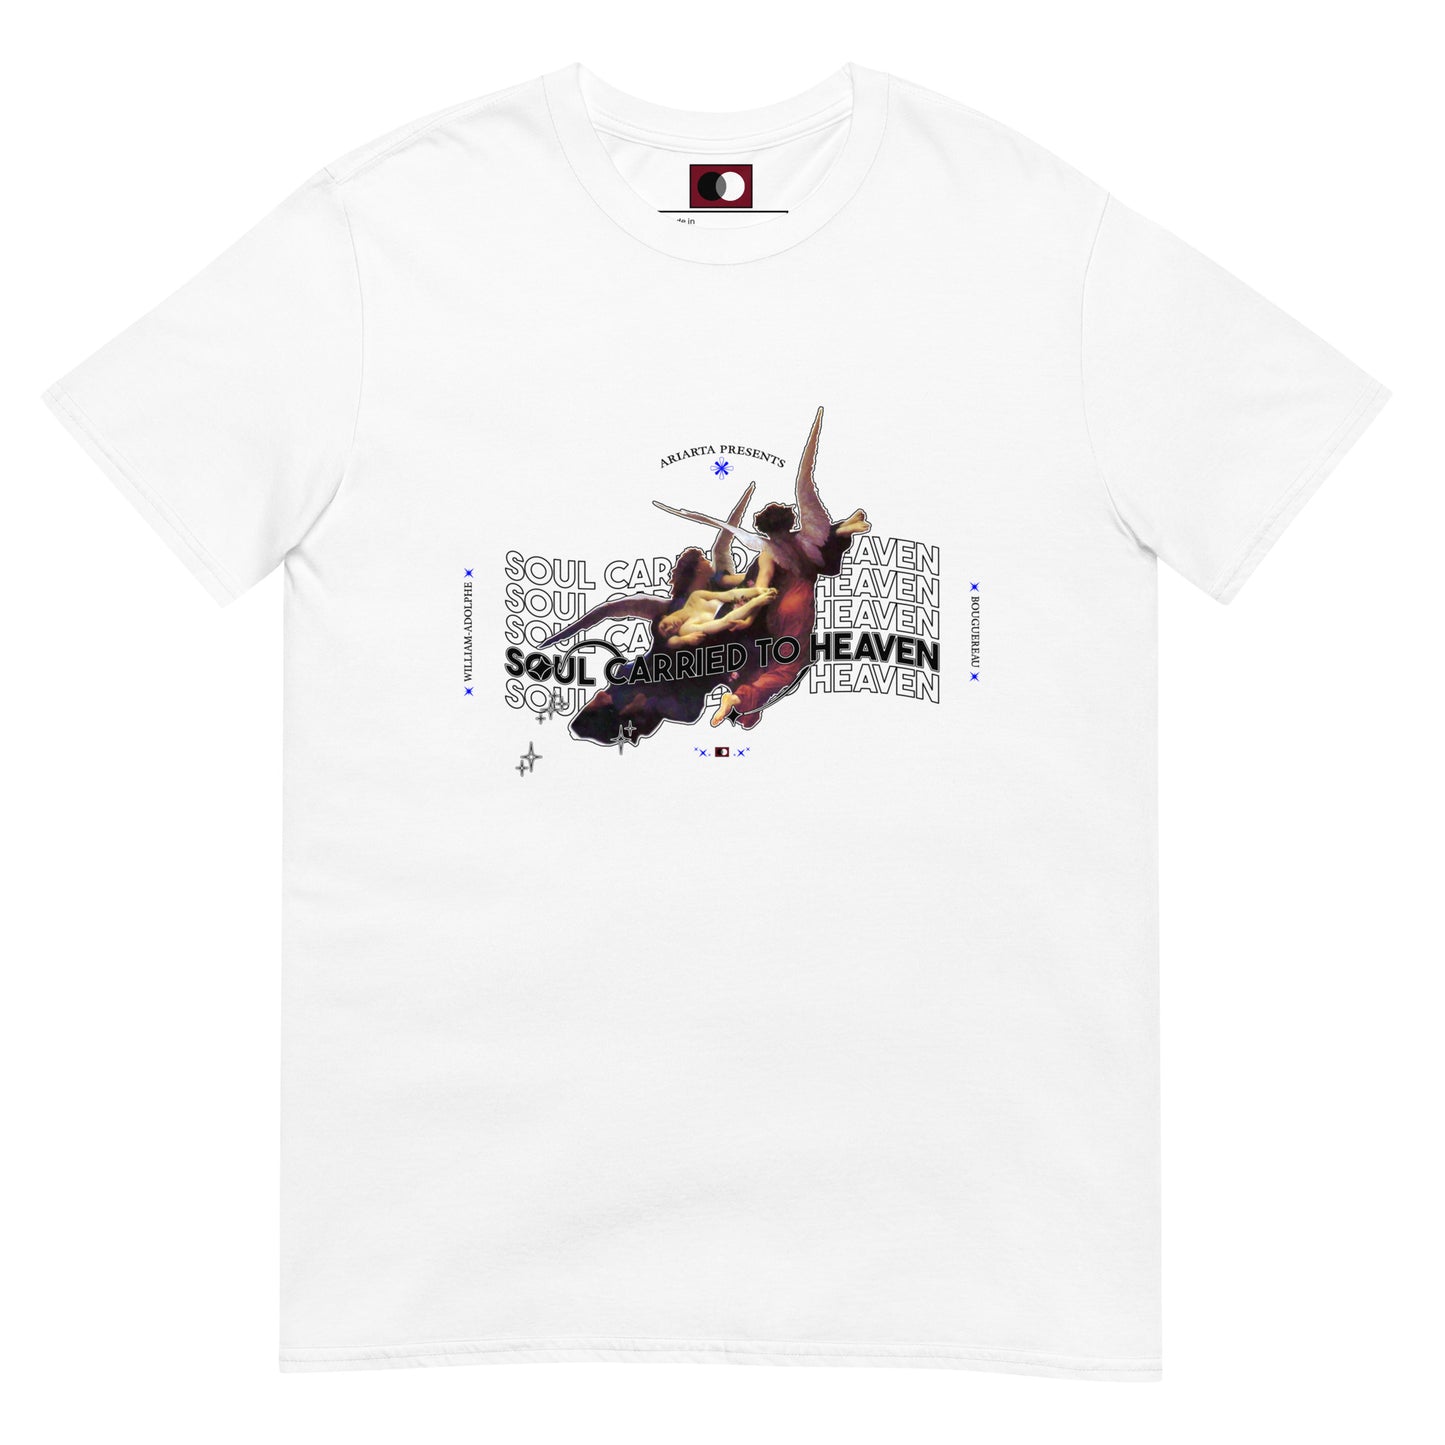 SOUL CARRIED TO HEAVEN T-SHIRT